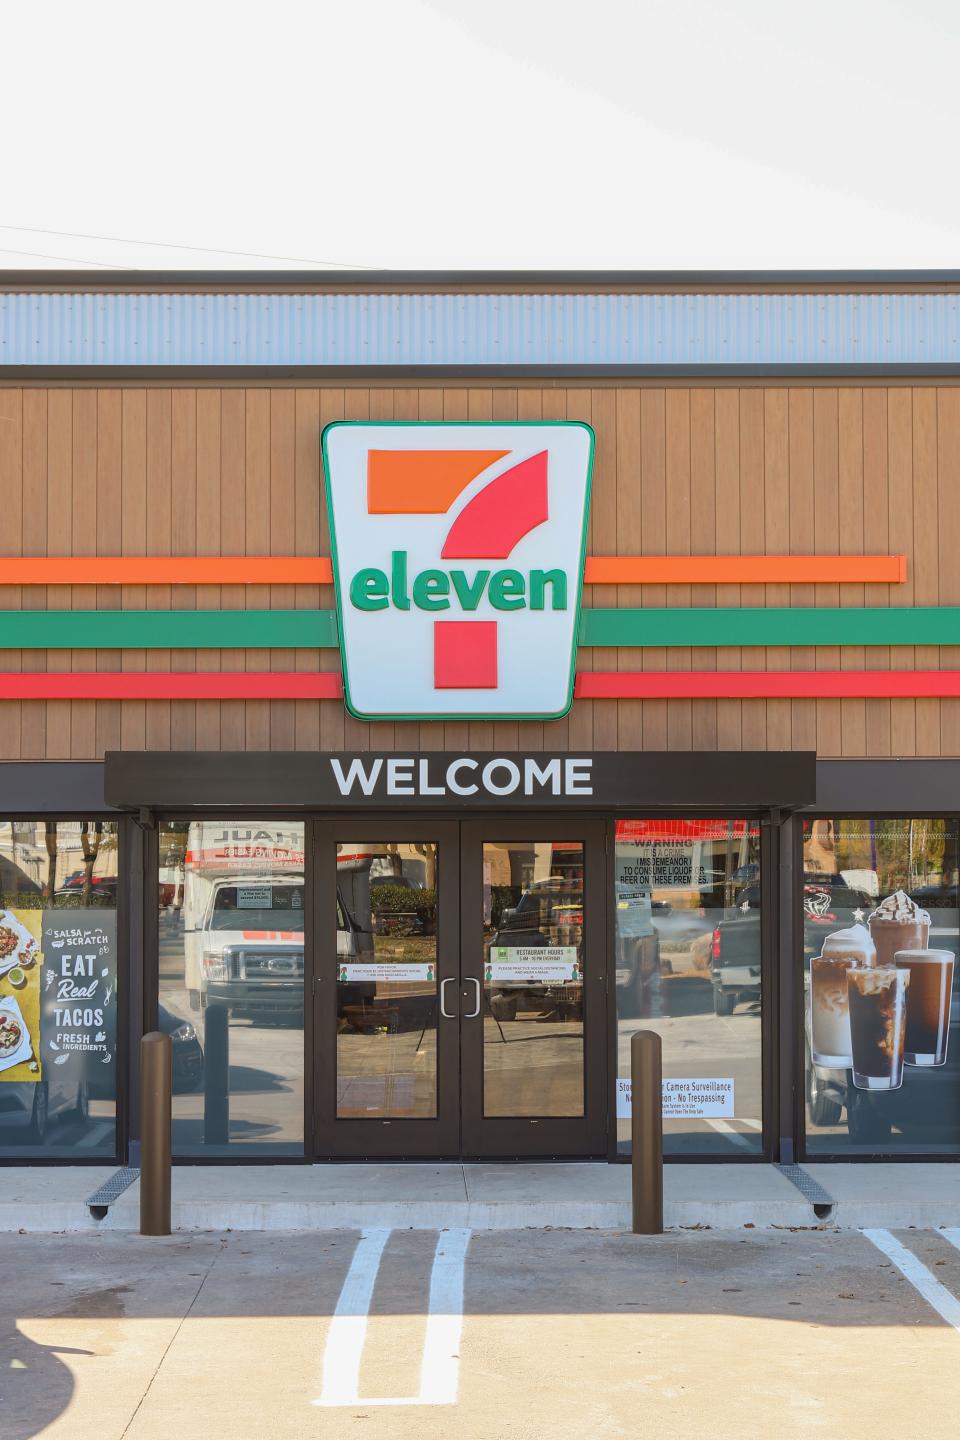 7-Eleven has several food deals on New Year's Eve and New Year's Day including a whole pizza for $6.